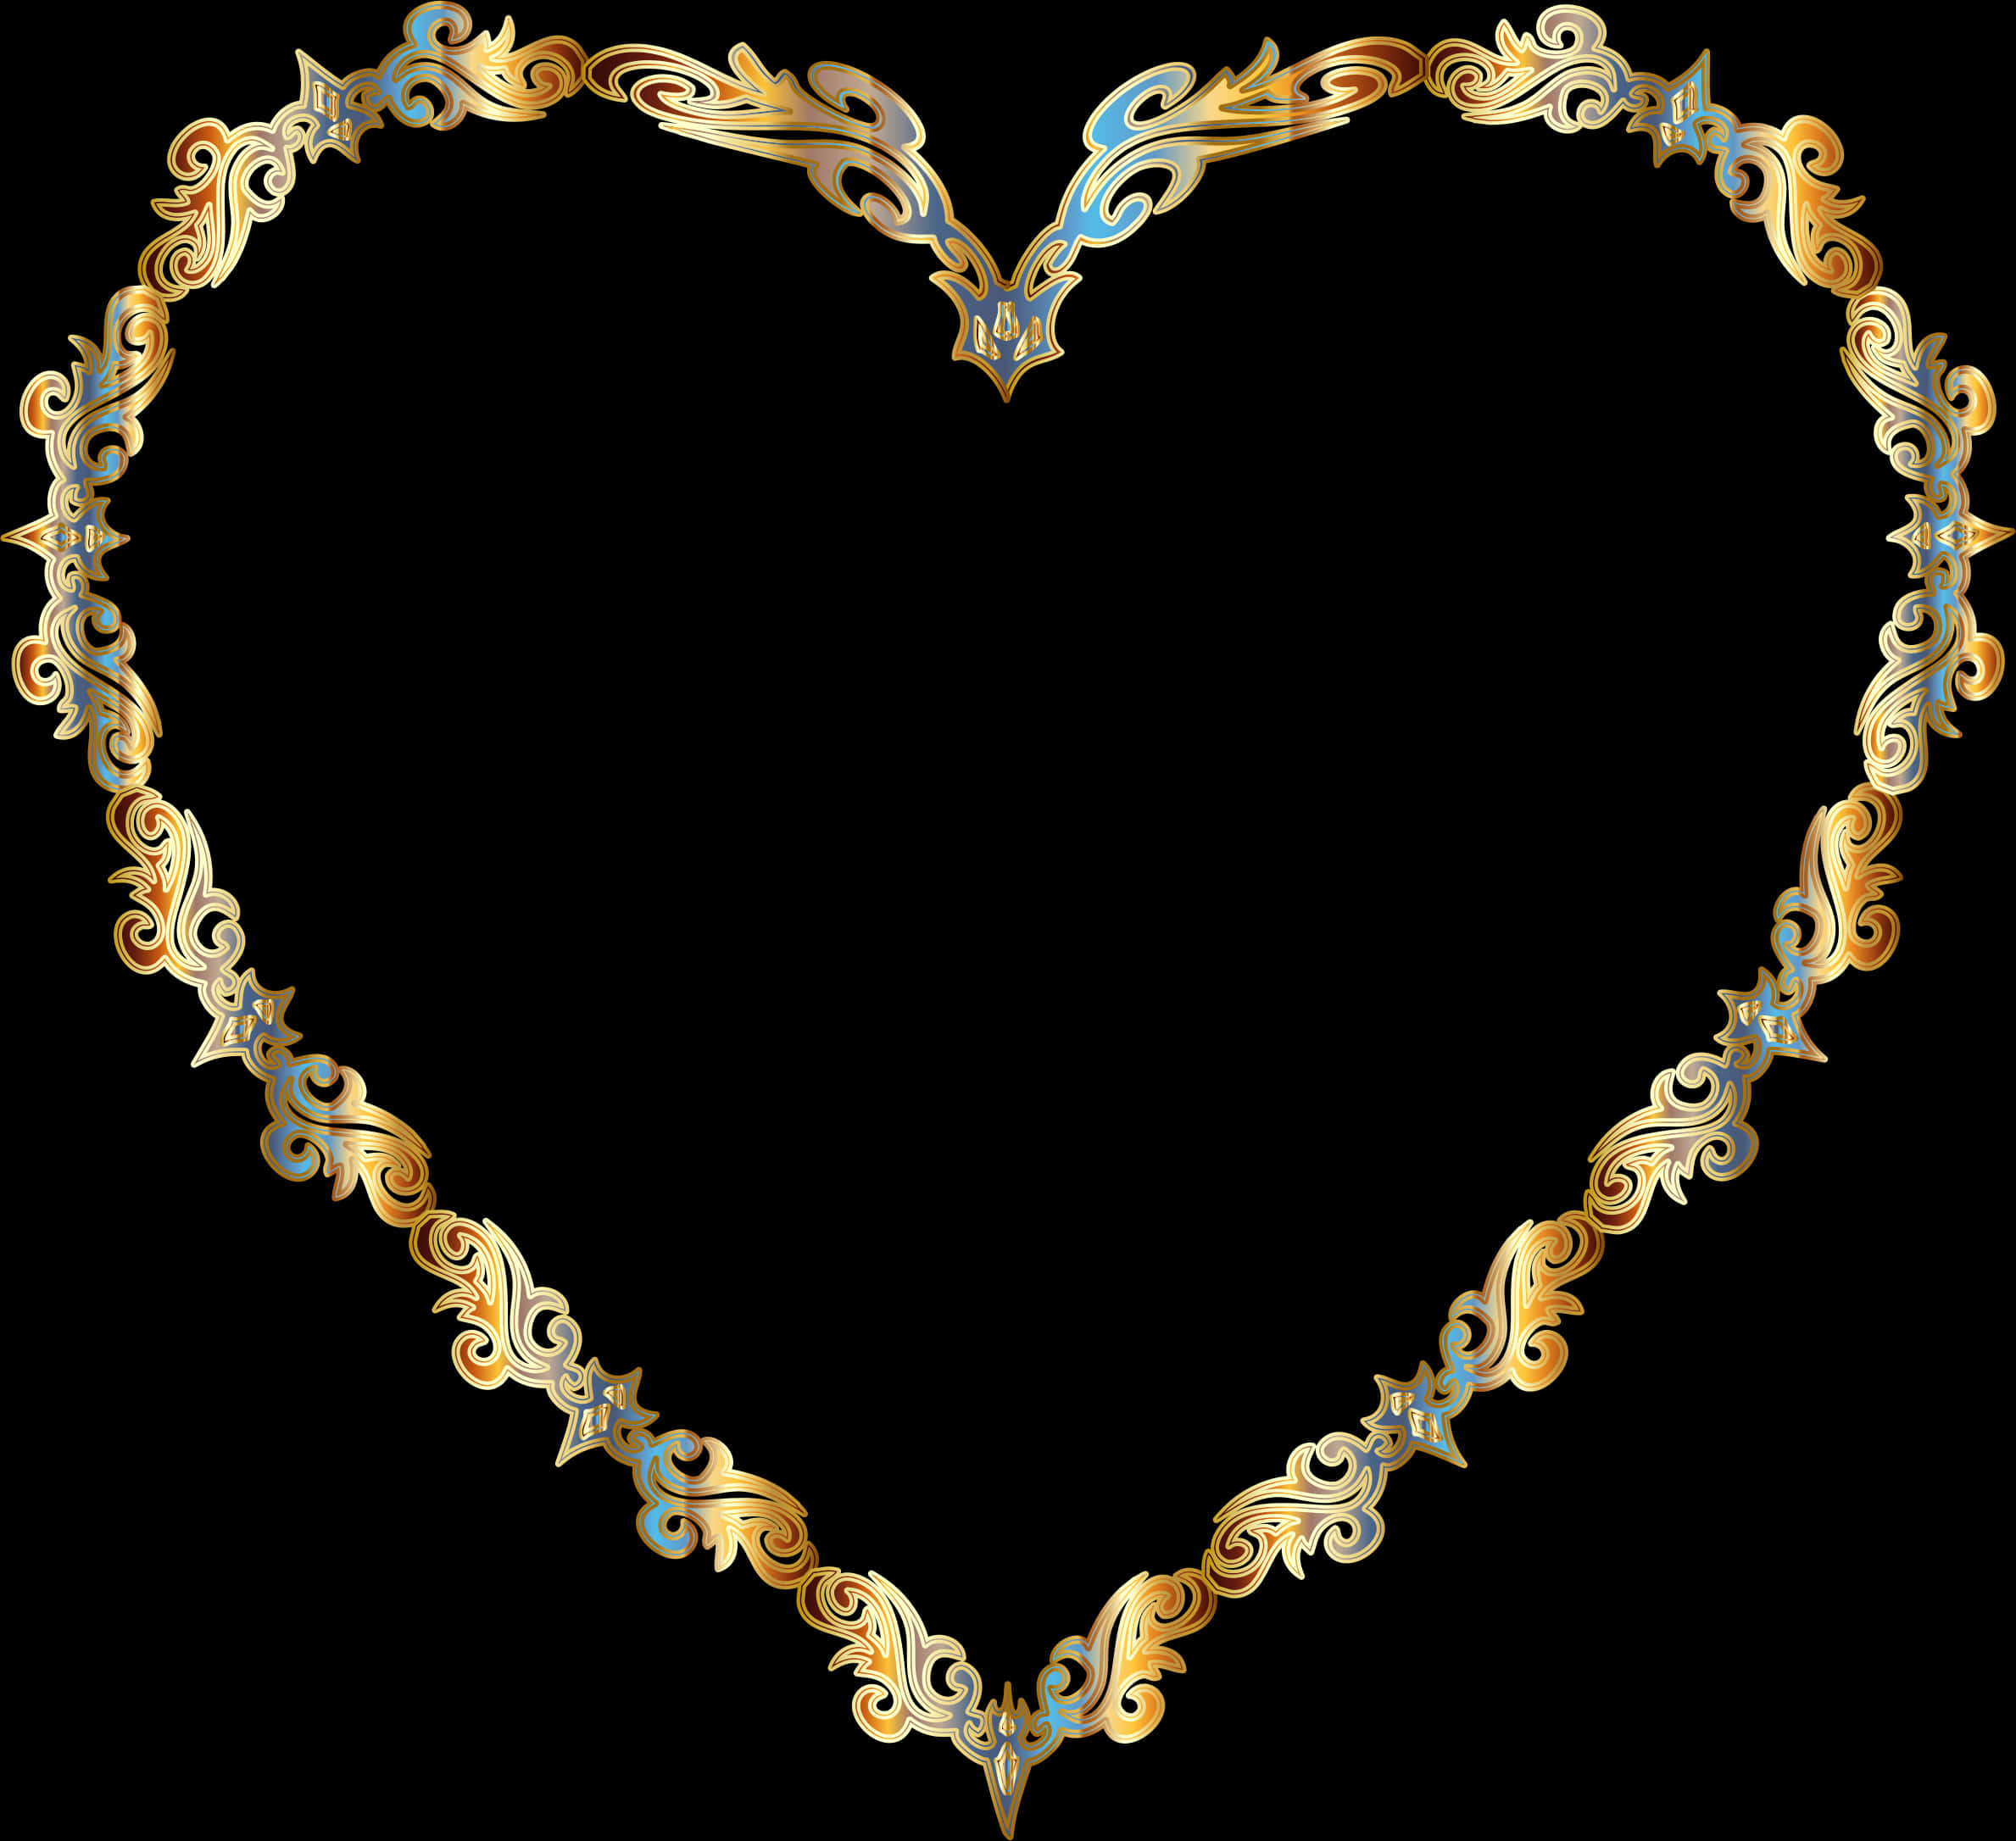 A Gold And Blue Heart Shaped Frame